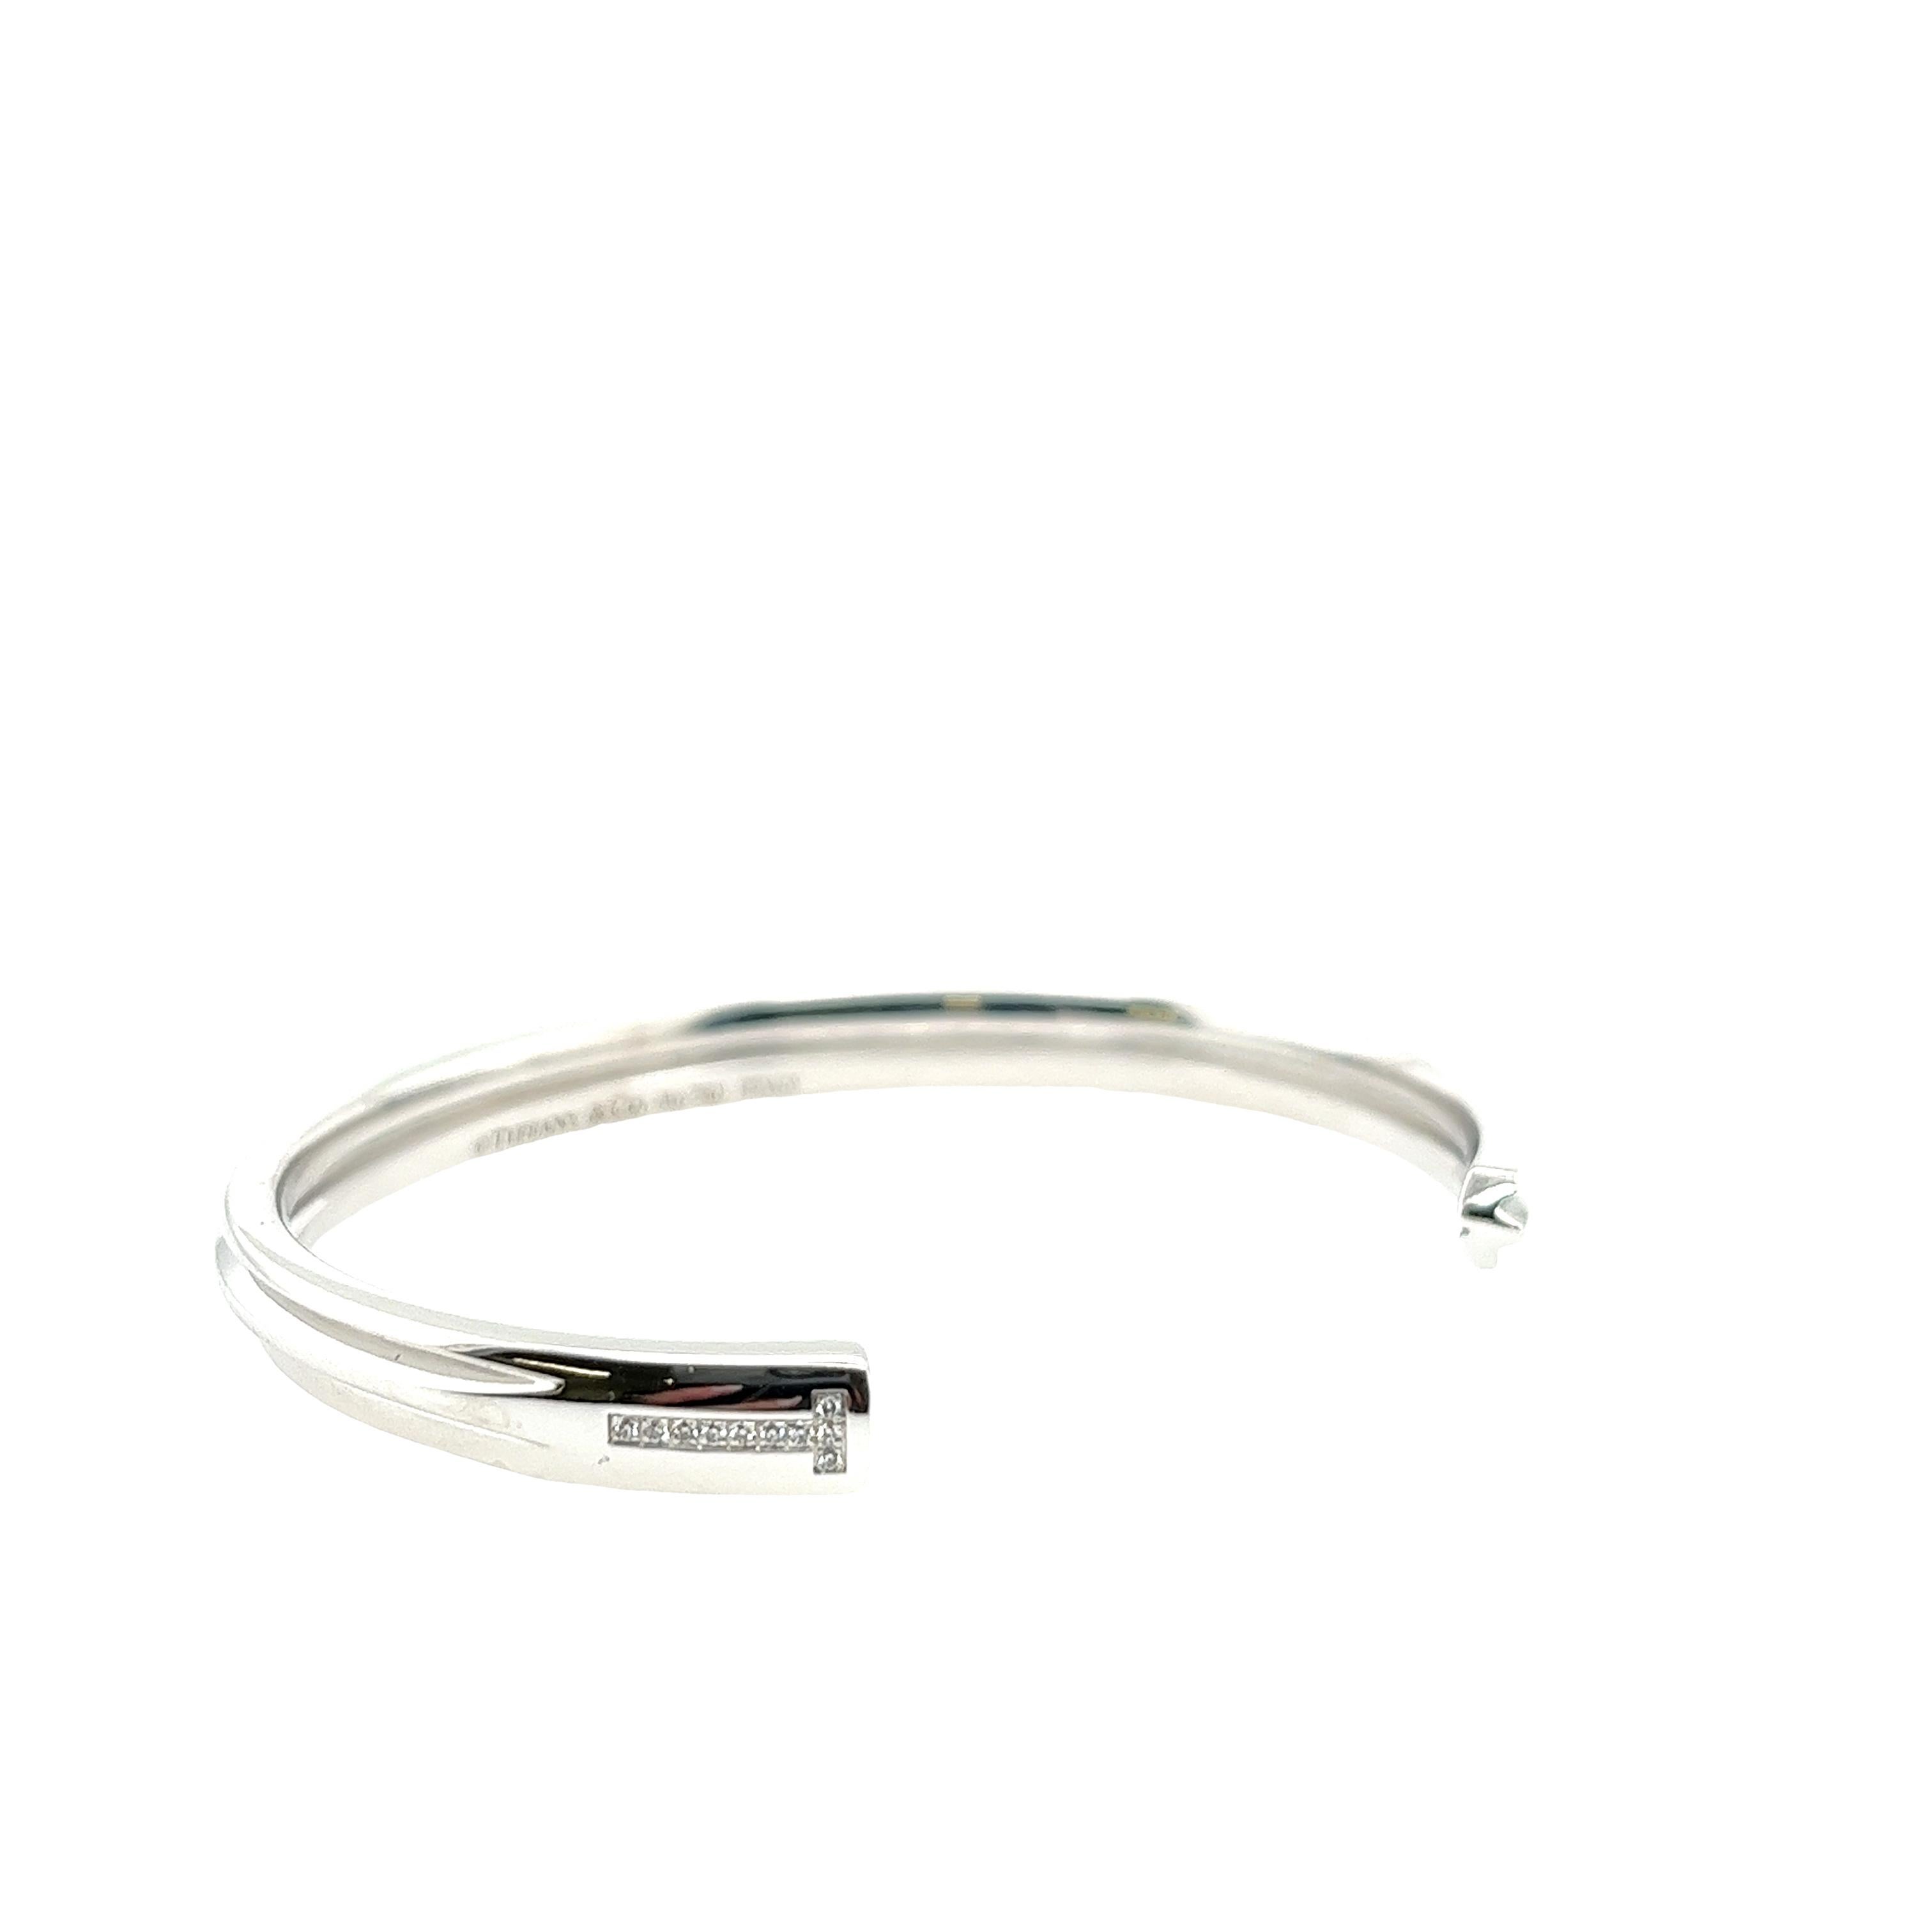 Tiffany & Co Modern Keys Cuff White Gold Diamond Bracelet Bangle  In Excellent Condition For Sale In London, GB